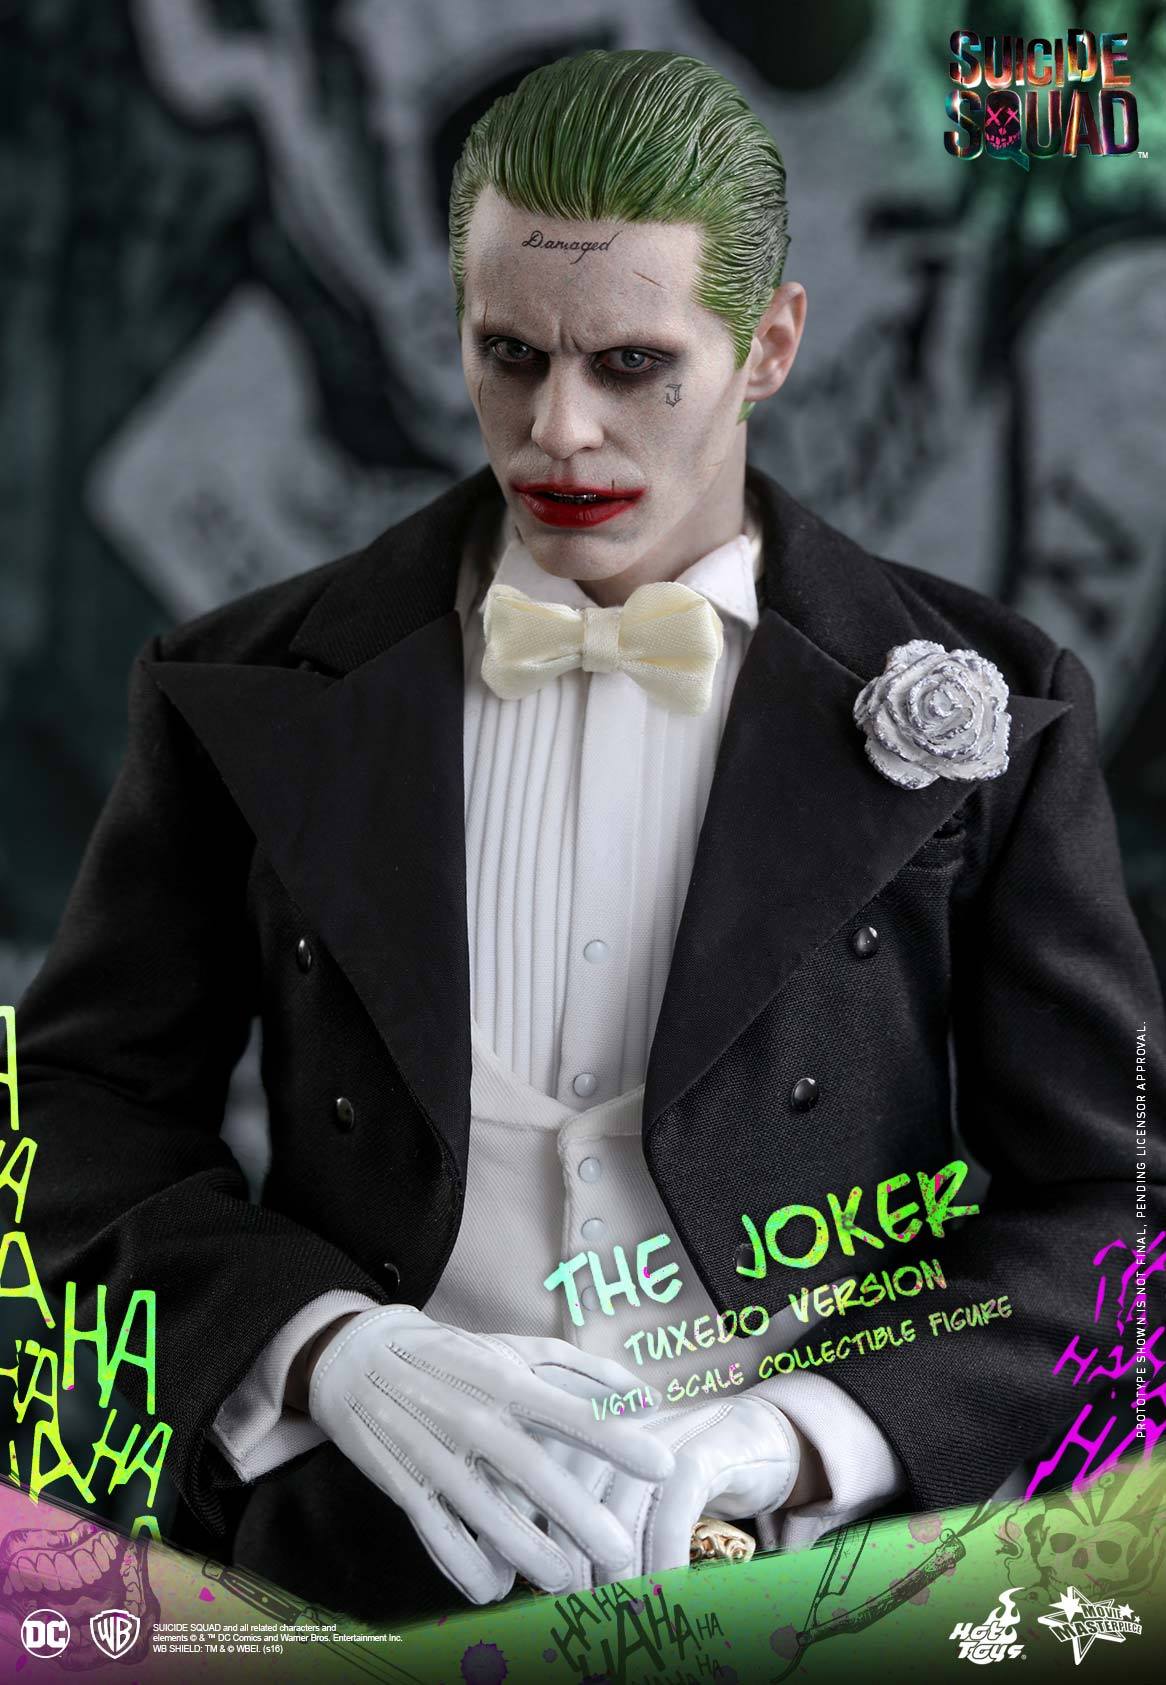 Hot Toys Reveals Tuxedo Variant for Suicide Squad's The Joker